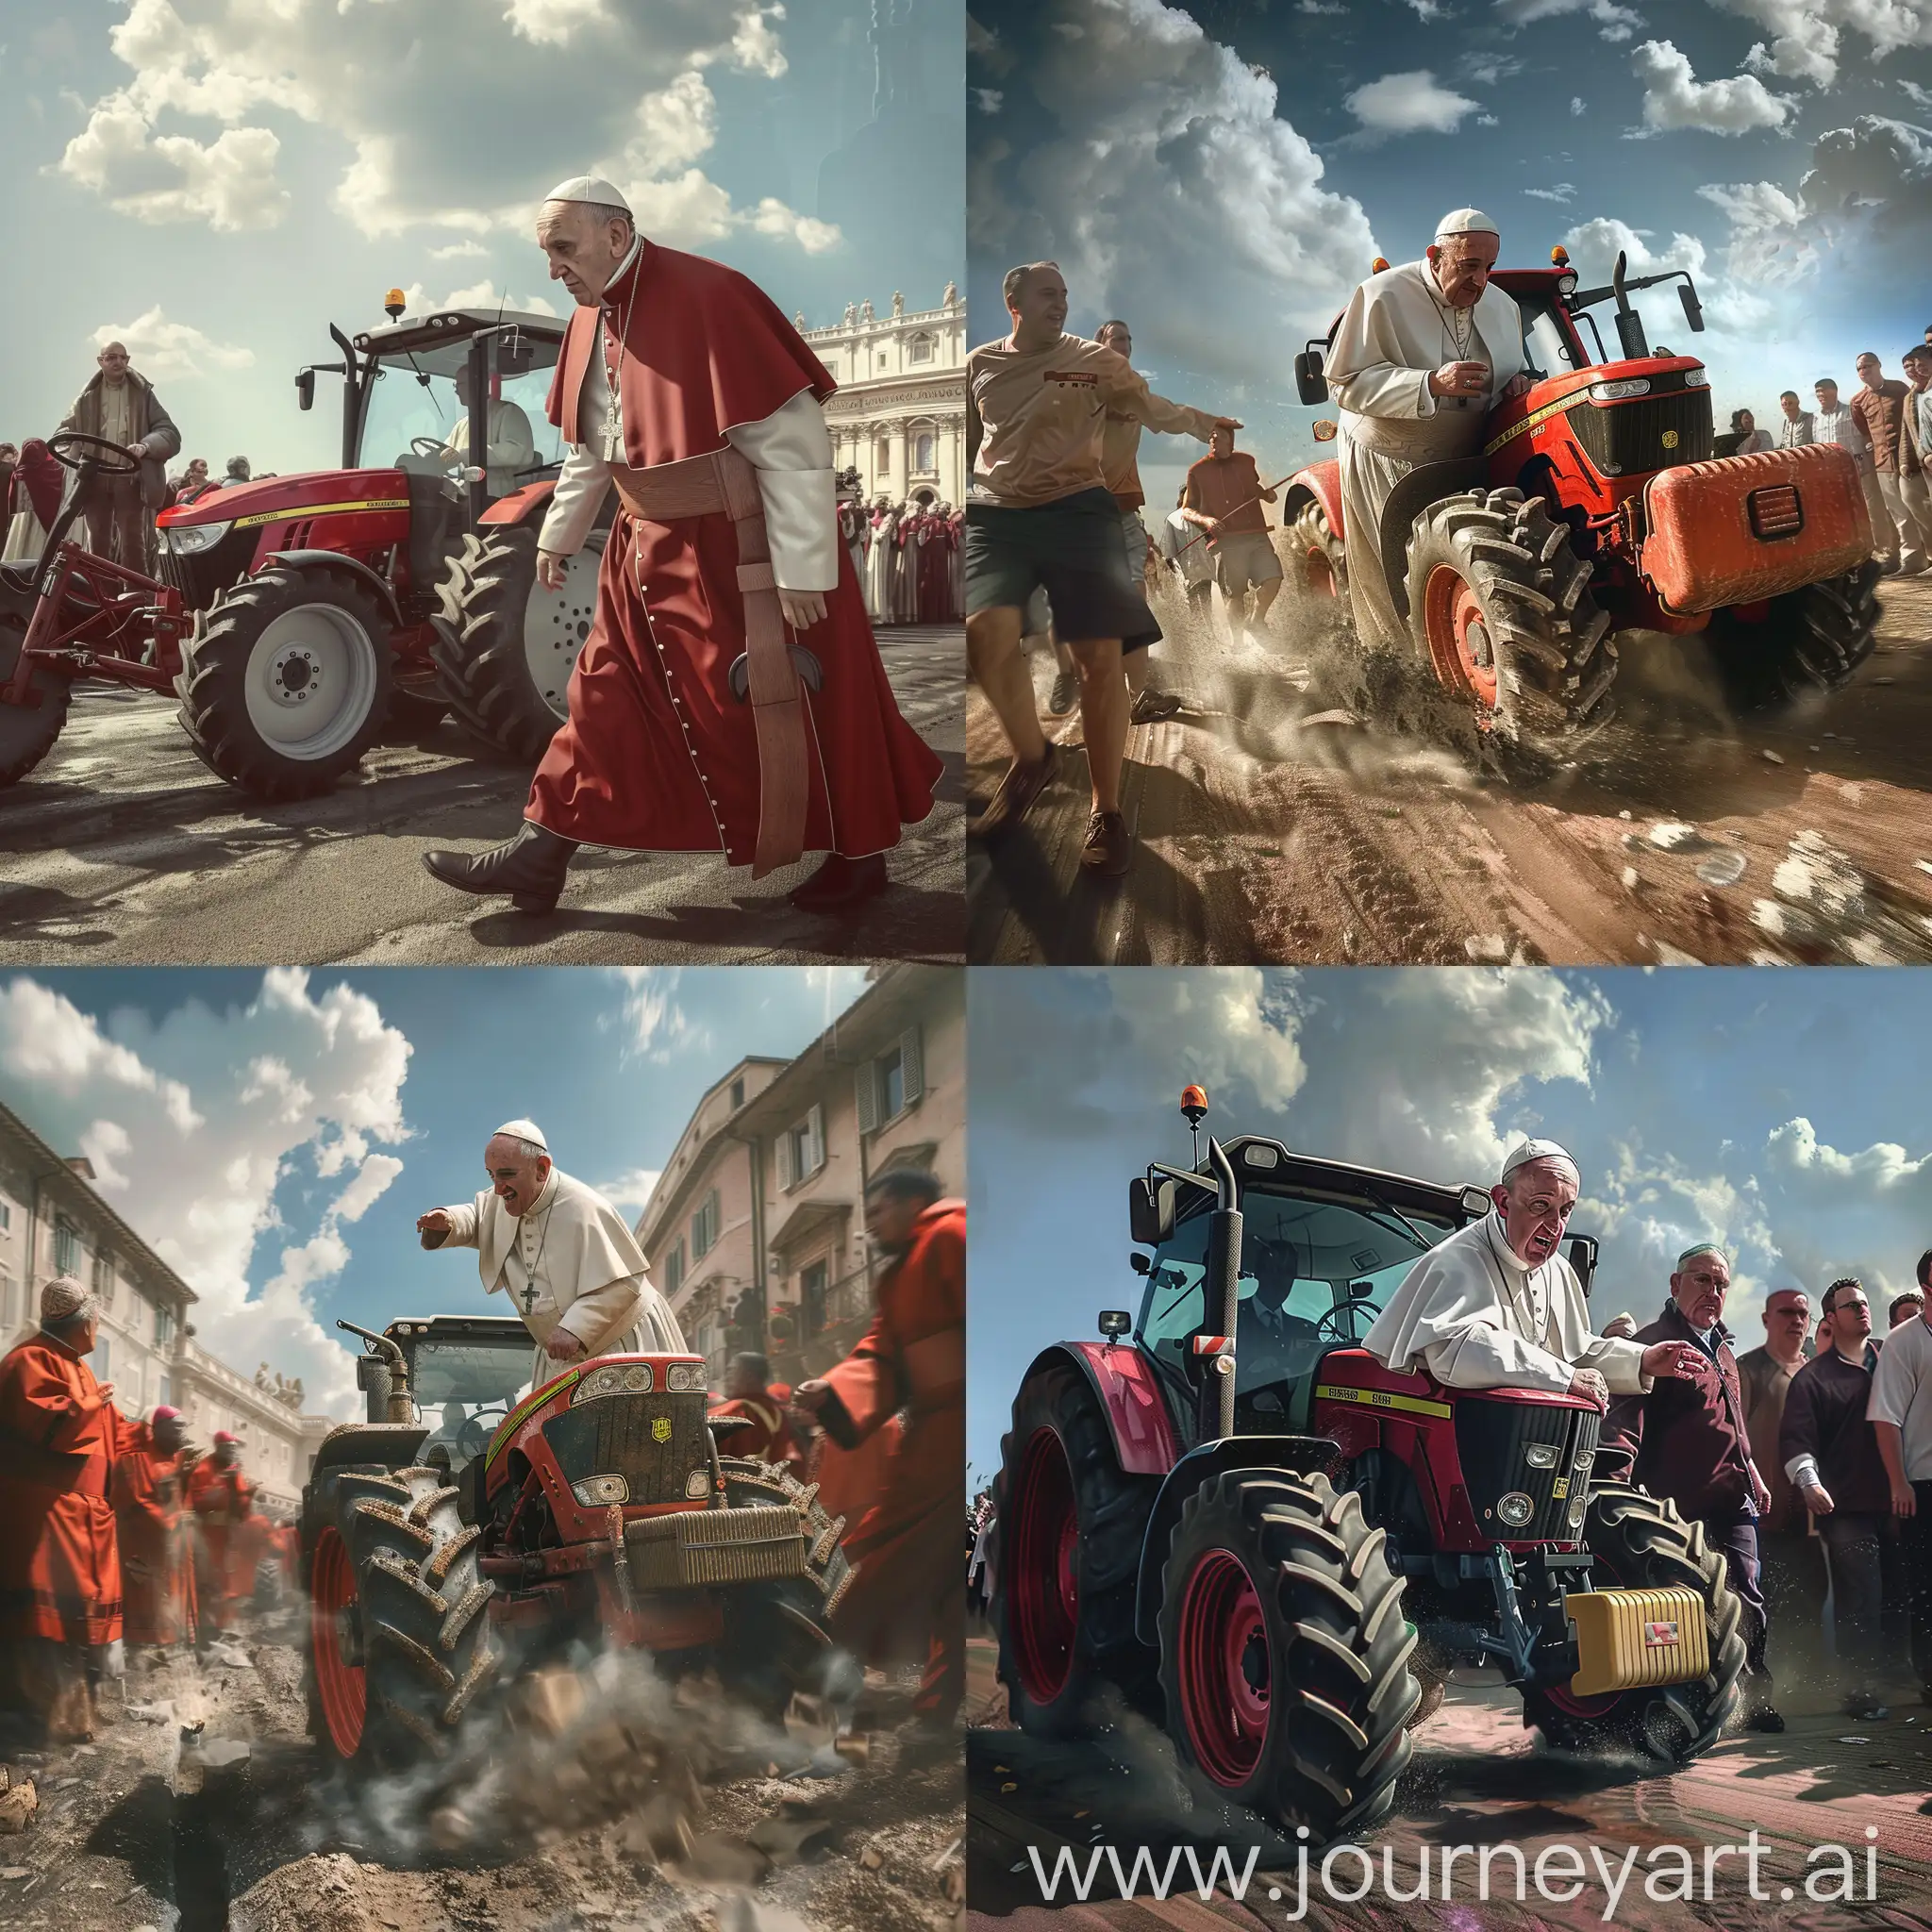 Pope-Francis-Interrupts-Religious-Procession-with-Tractor